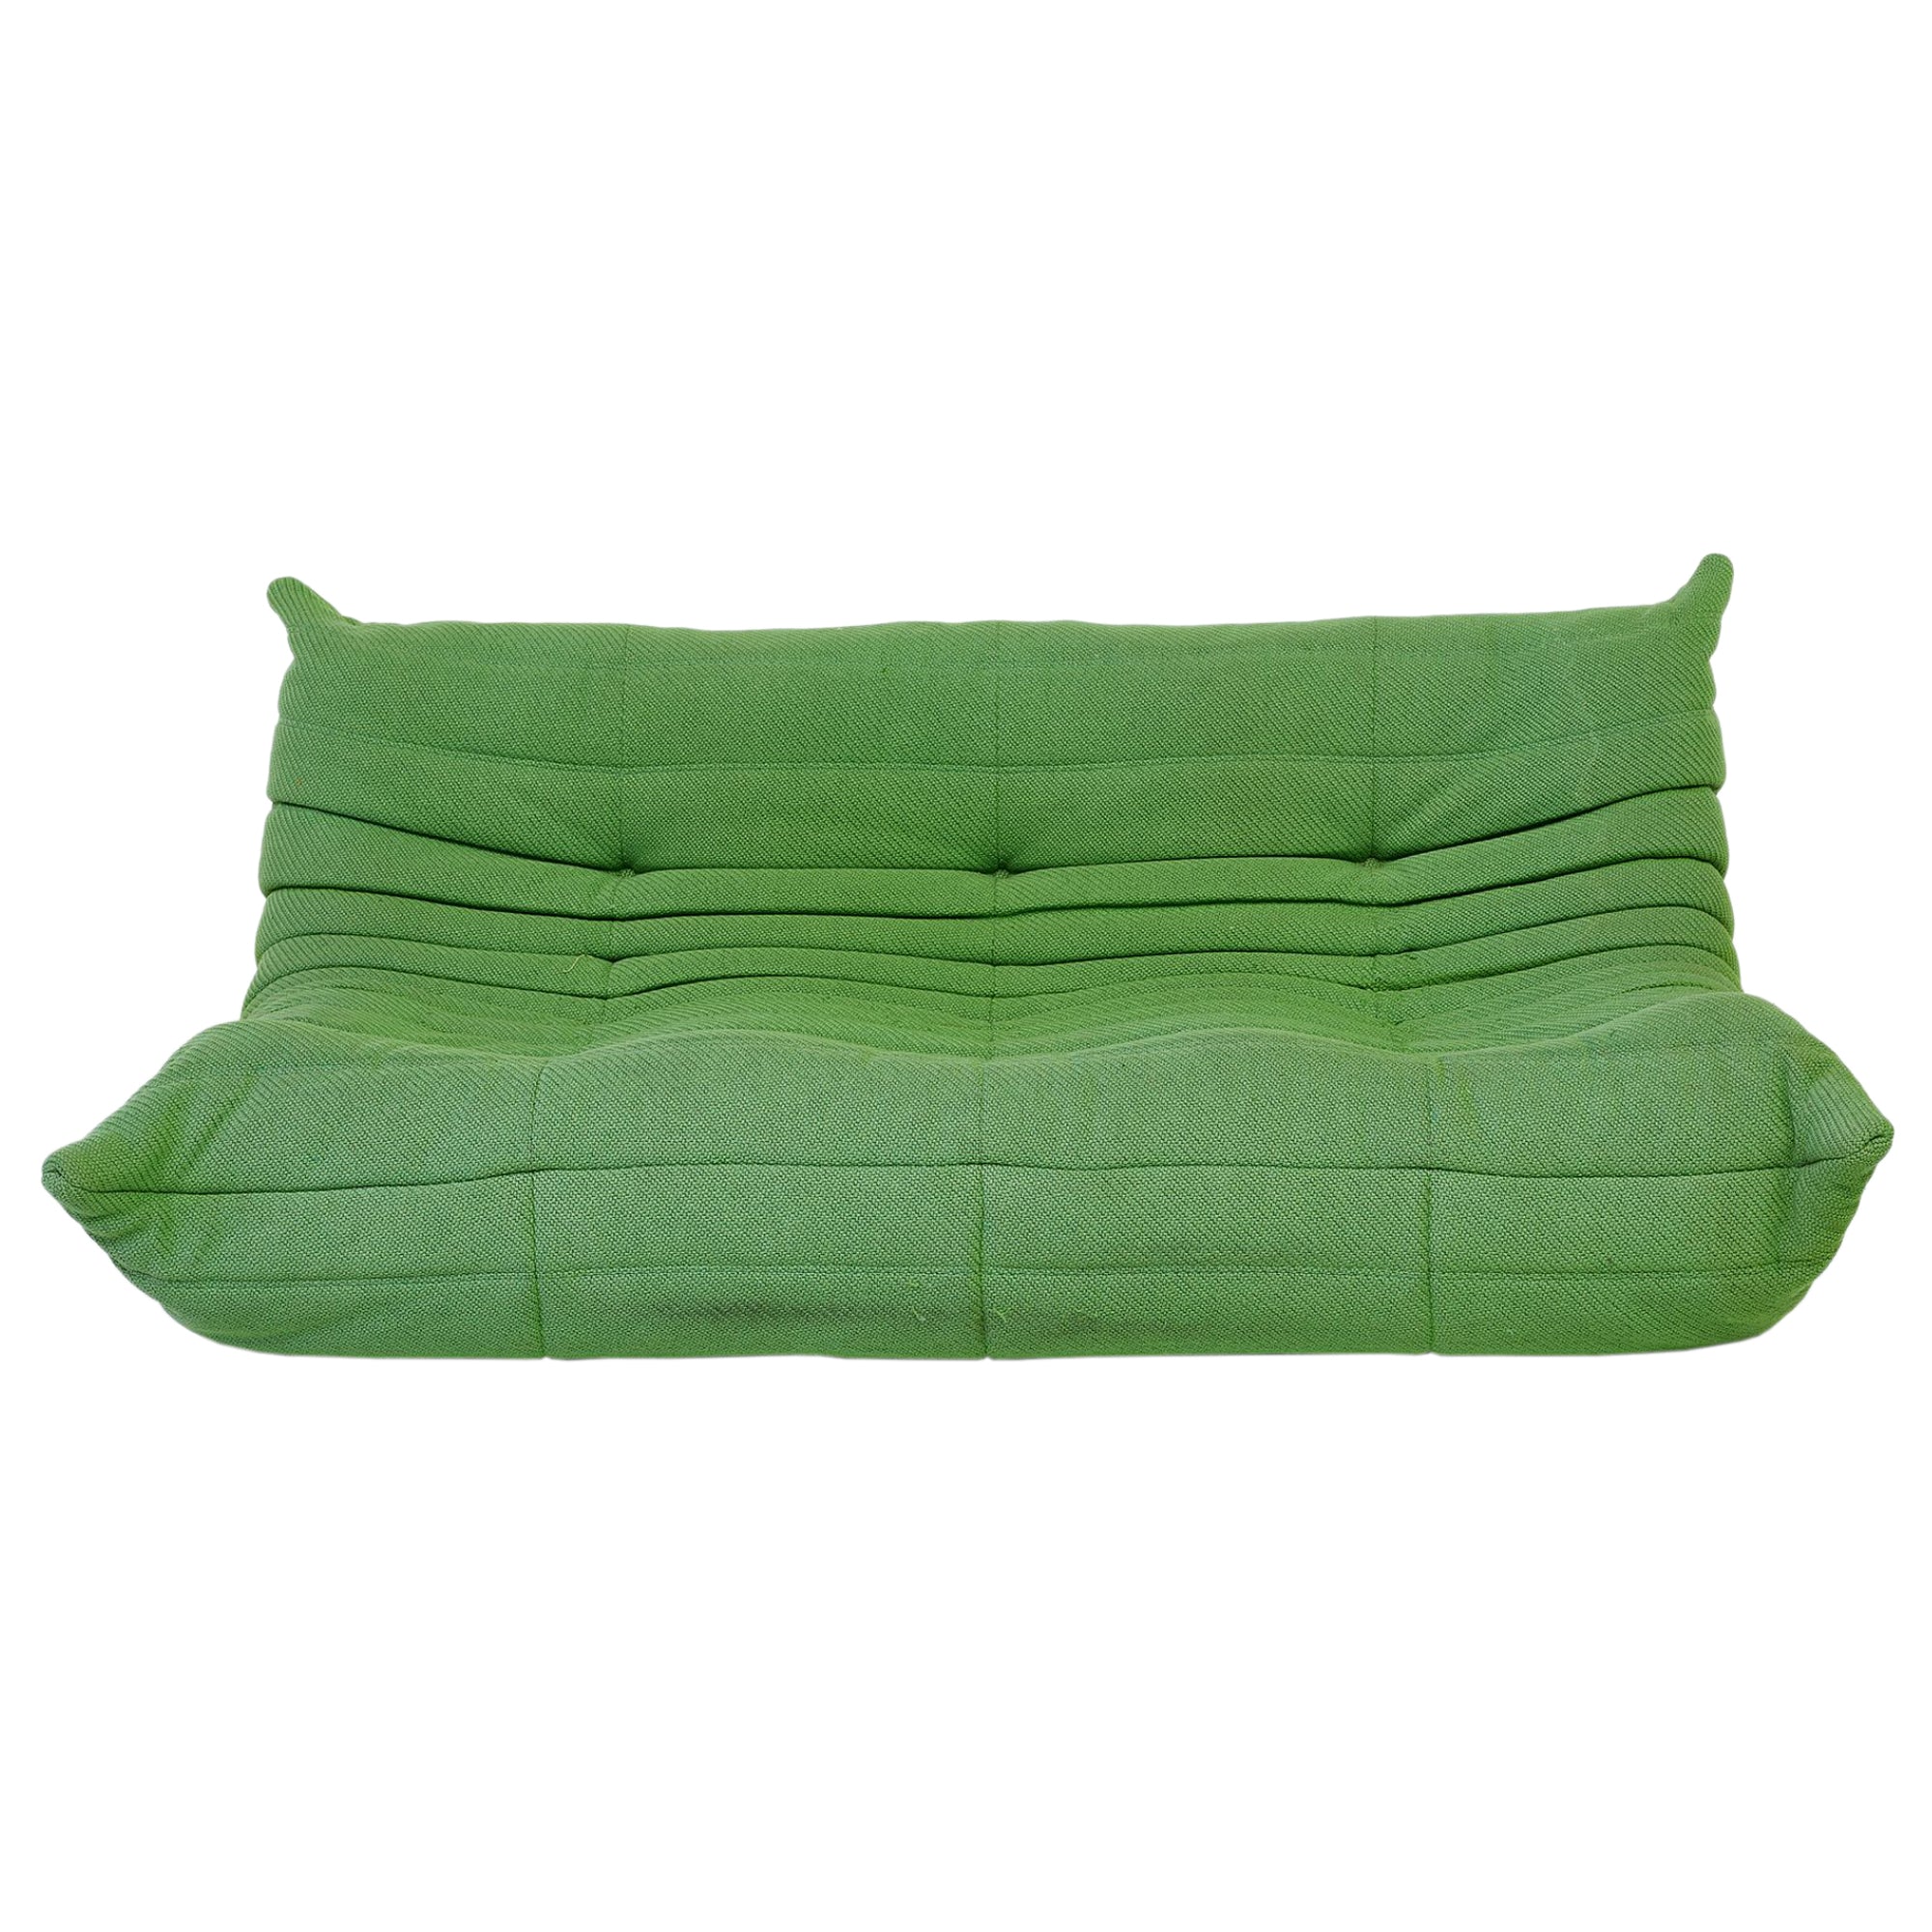 Three-Part "Togo" Sectional Sofa by Michel Ducaroy for Ligne Roset